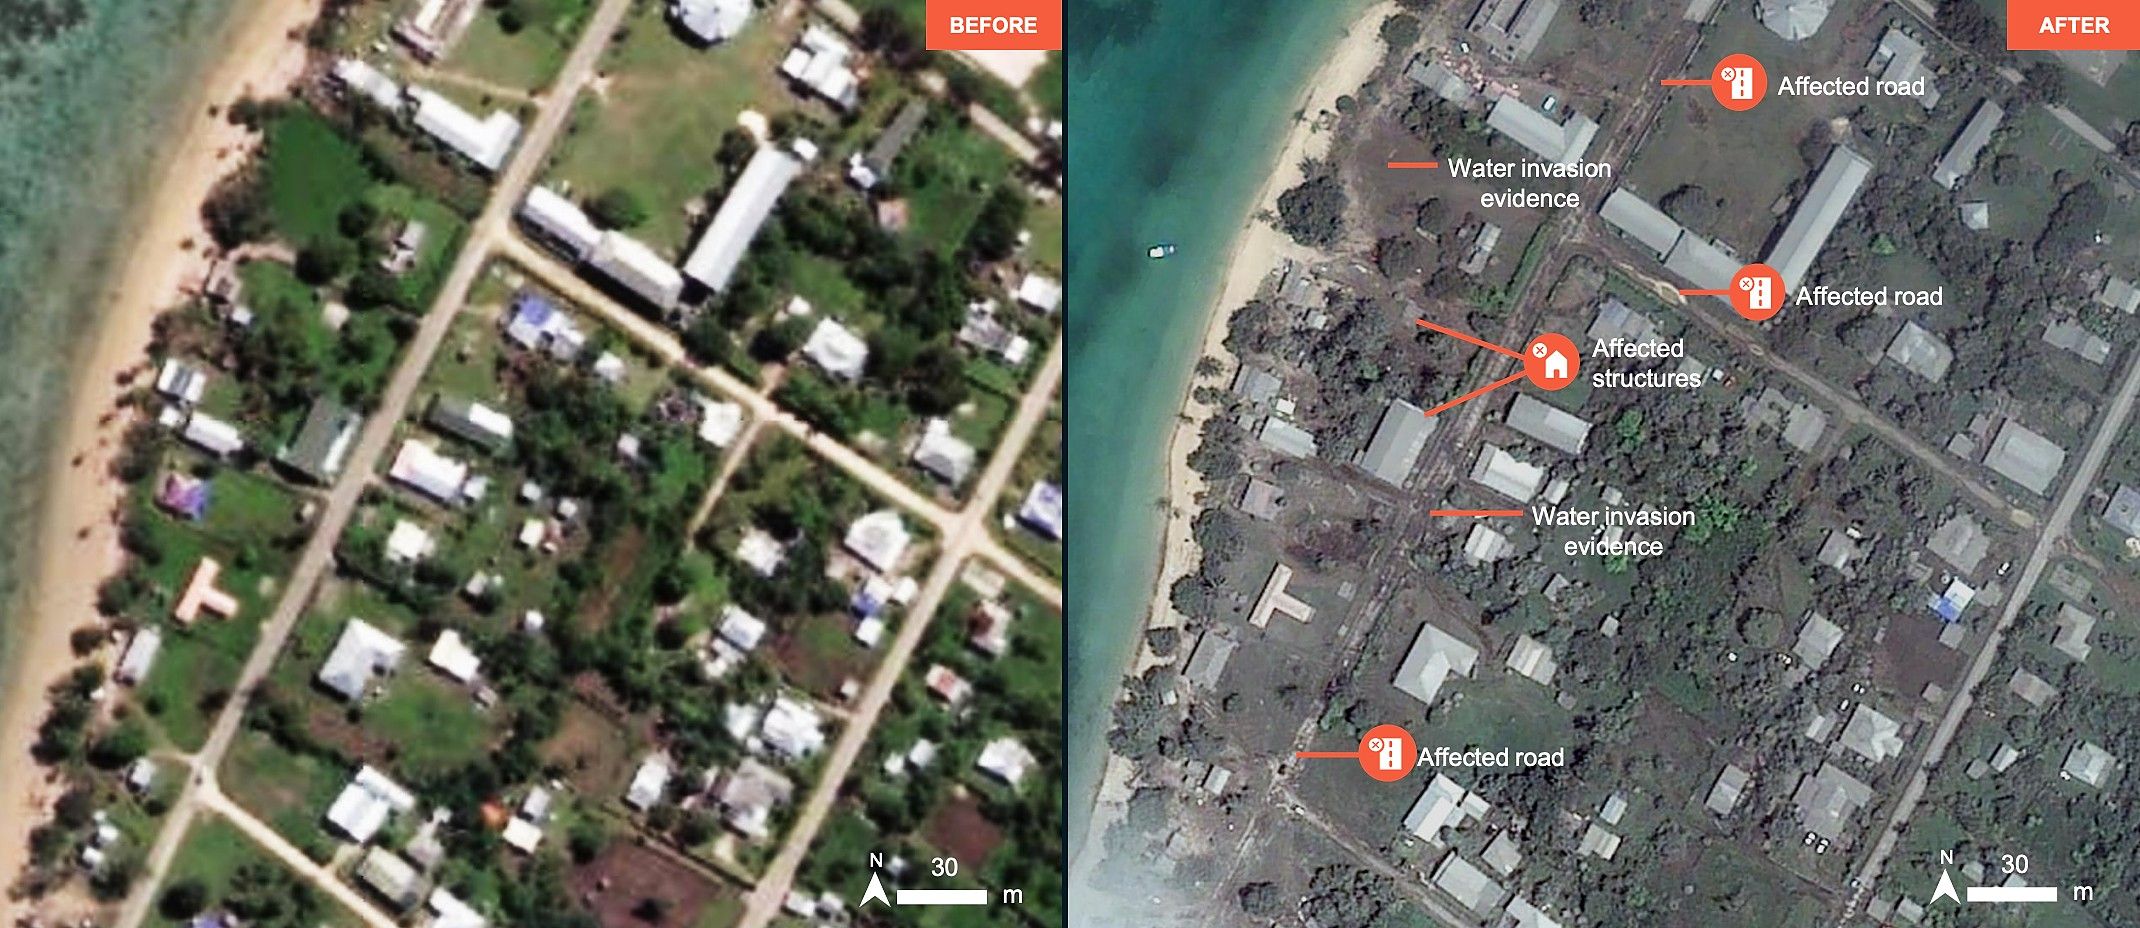  Before and after satellite images of Tonga’s Lifuka Village in Pangai District. Right, map shows evidence of water invasion and other damage on roads and affected structures.